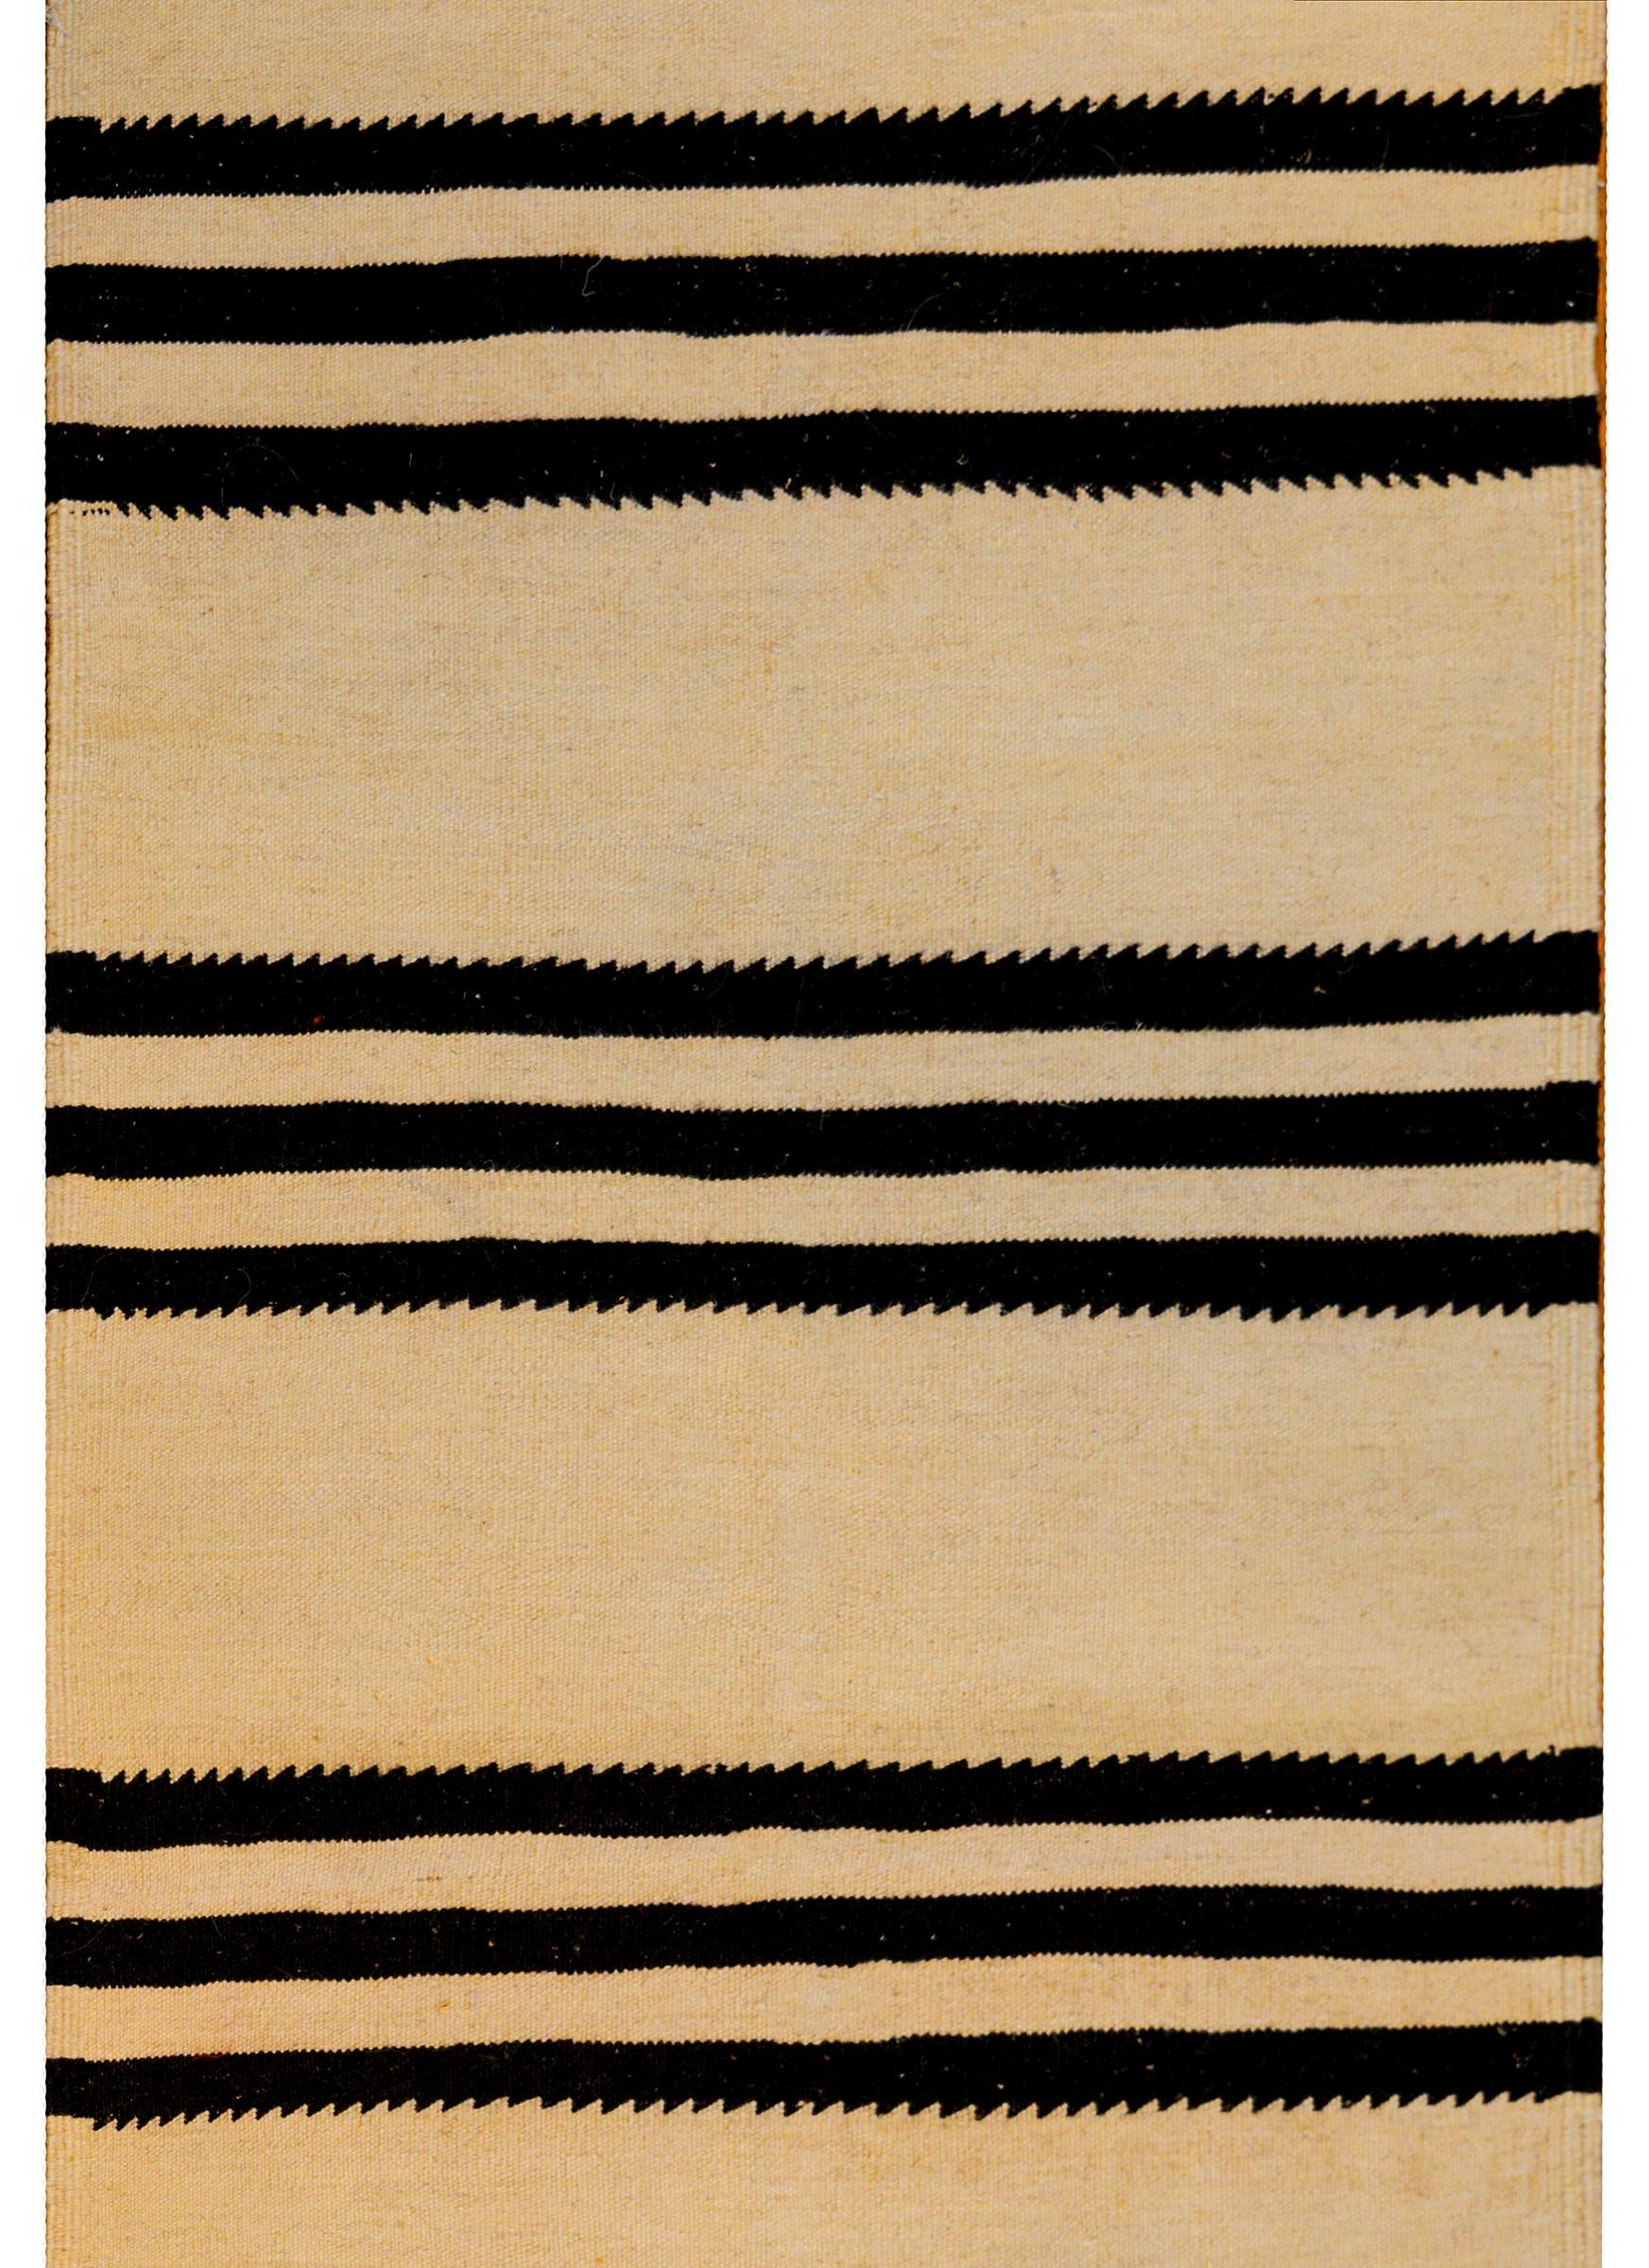 A wonderful early mid-20th century Persian Gabbeh Kilim runner with a bold horizontal black stripes with zigzag edges and natural wool stripes.